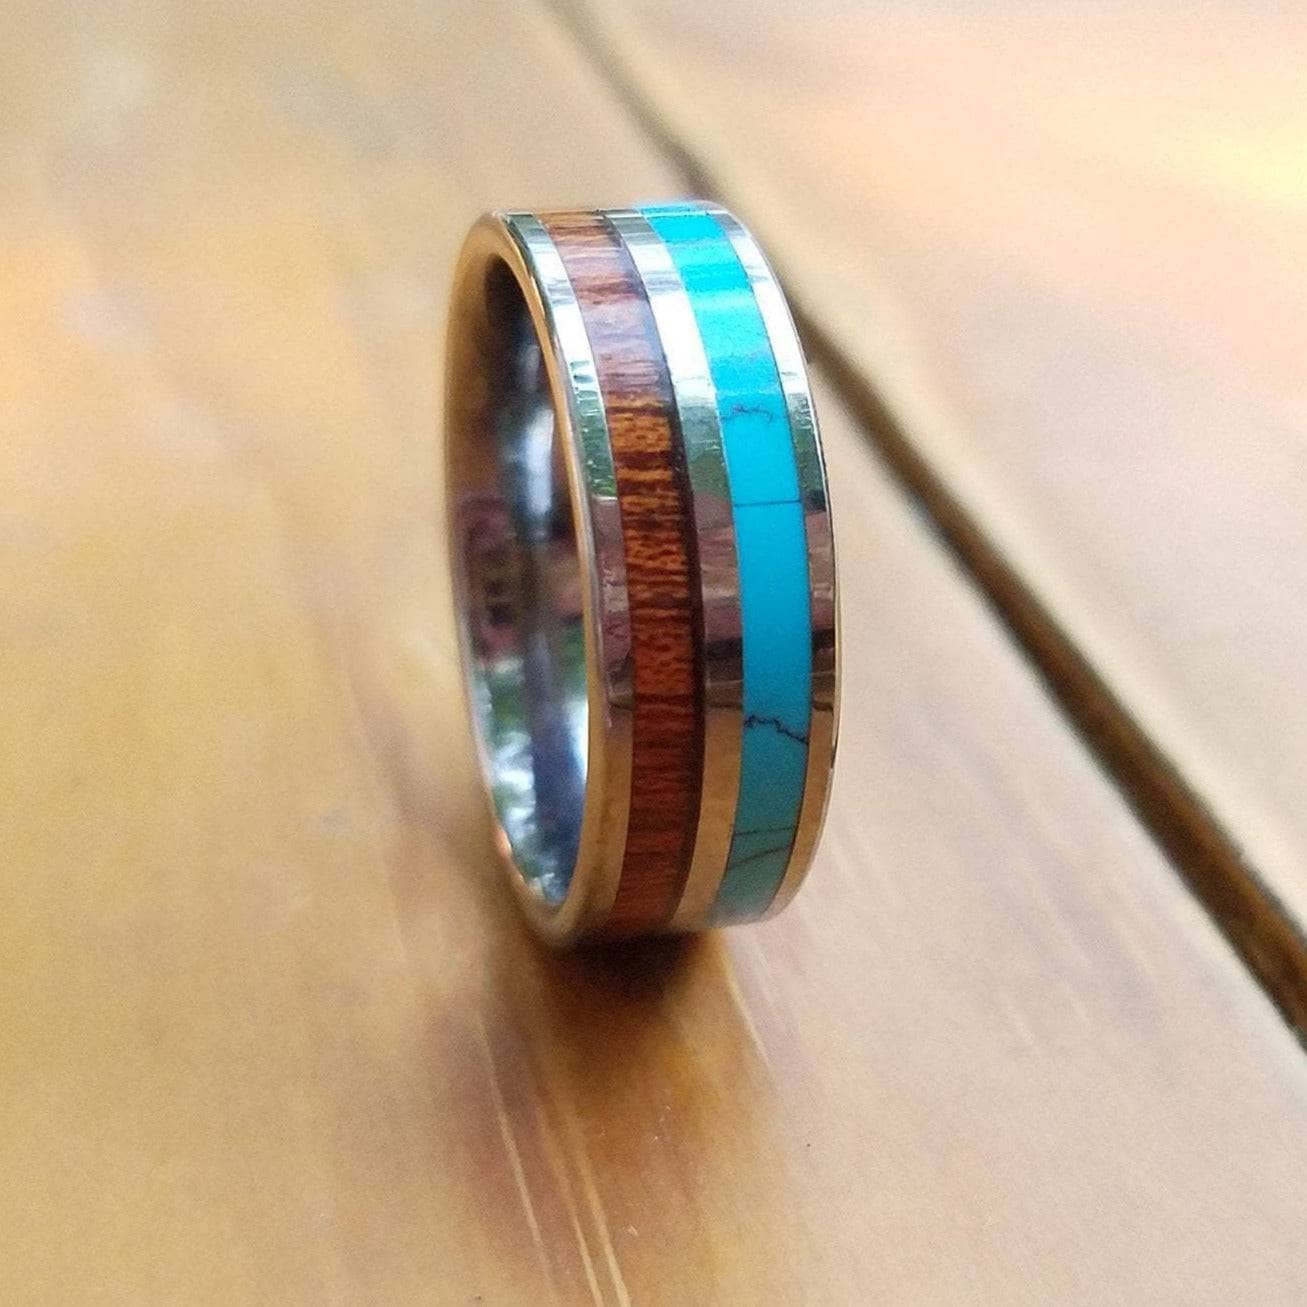 The Surfer - Men's Wedding Rings - Manly Bands